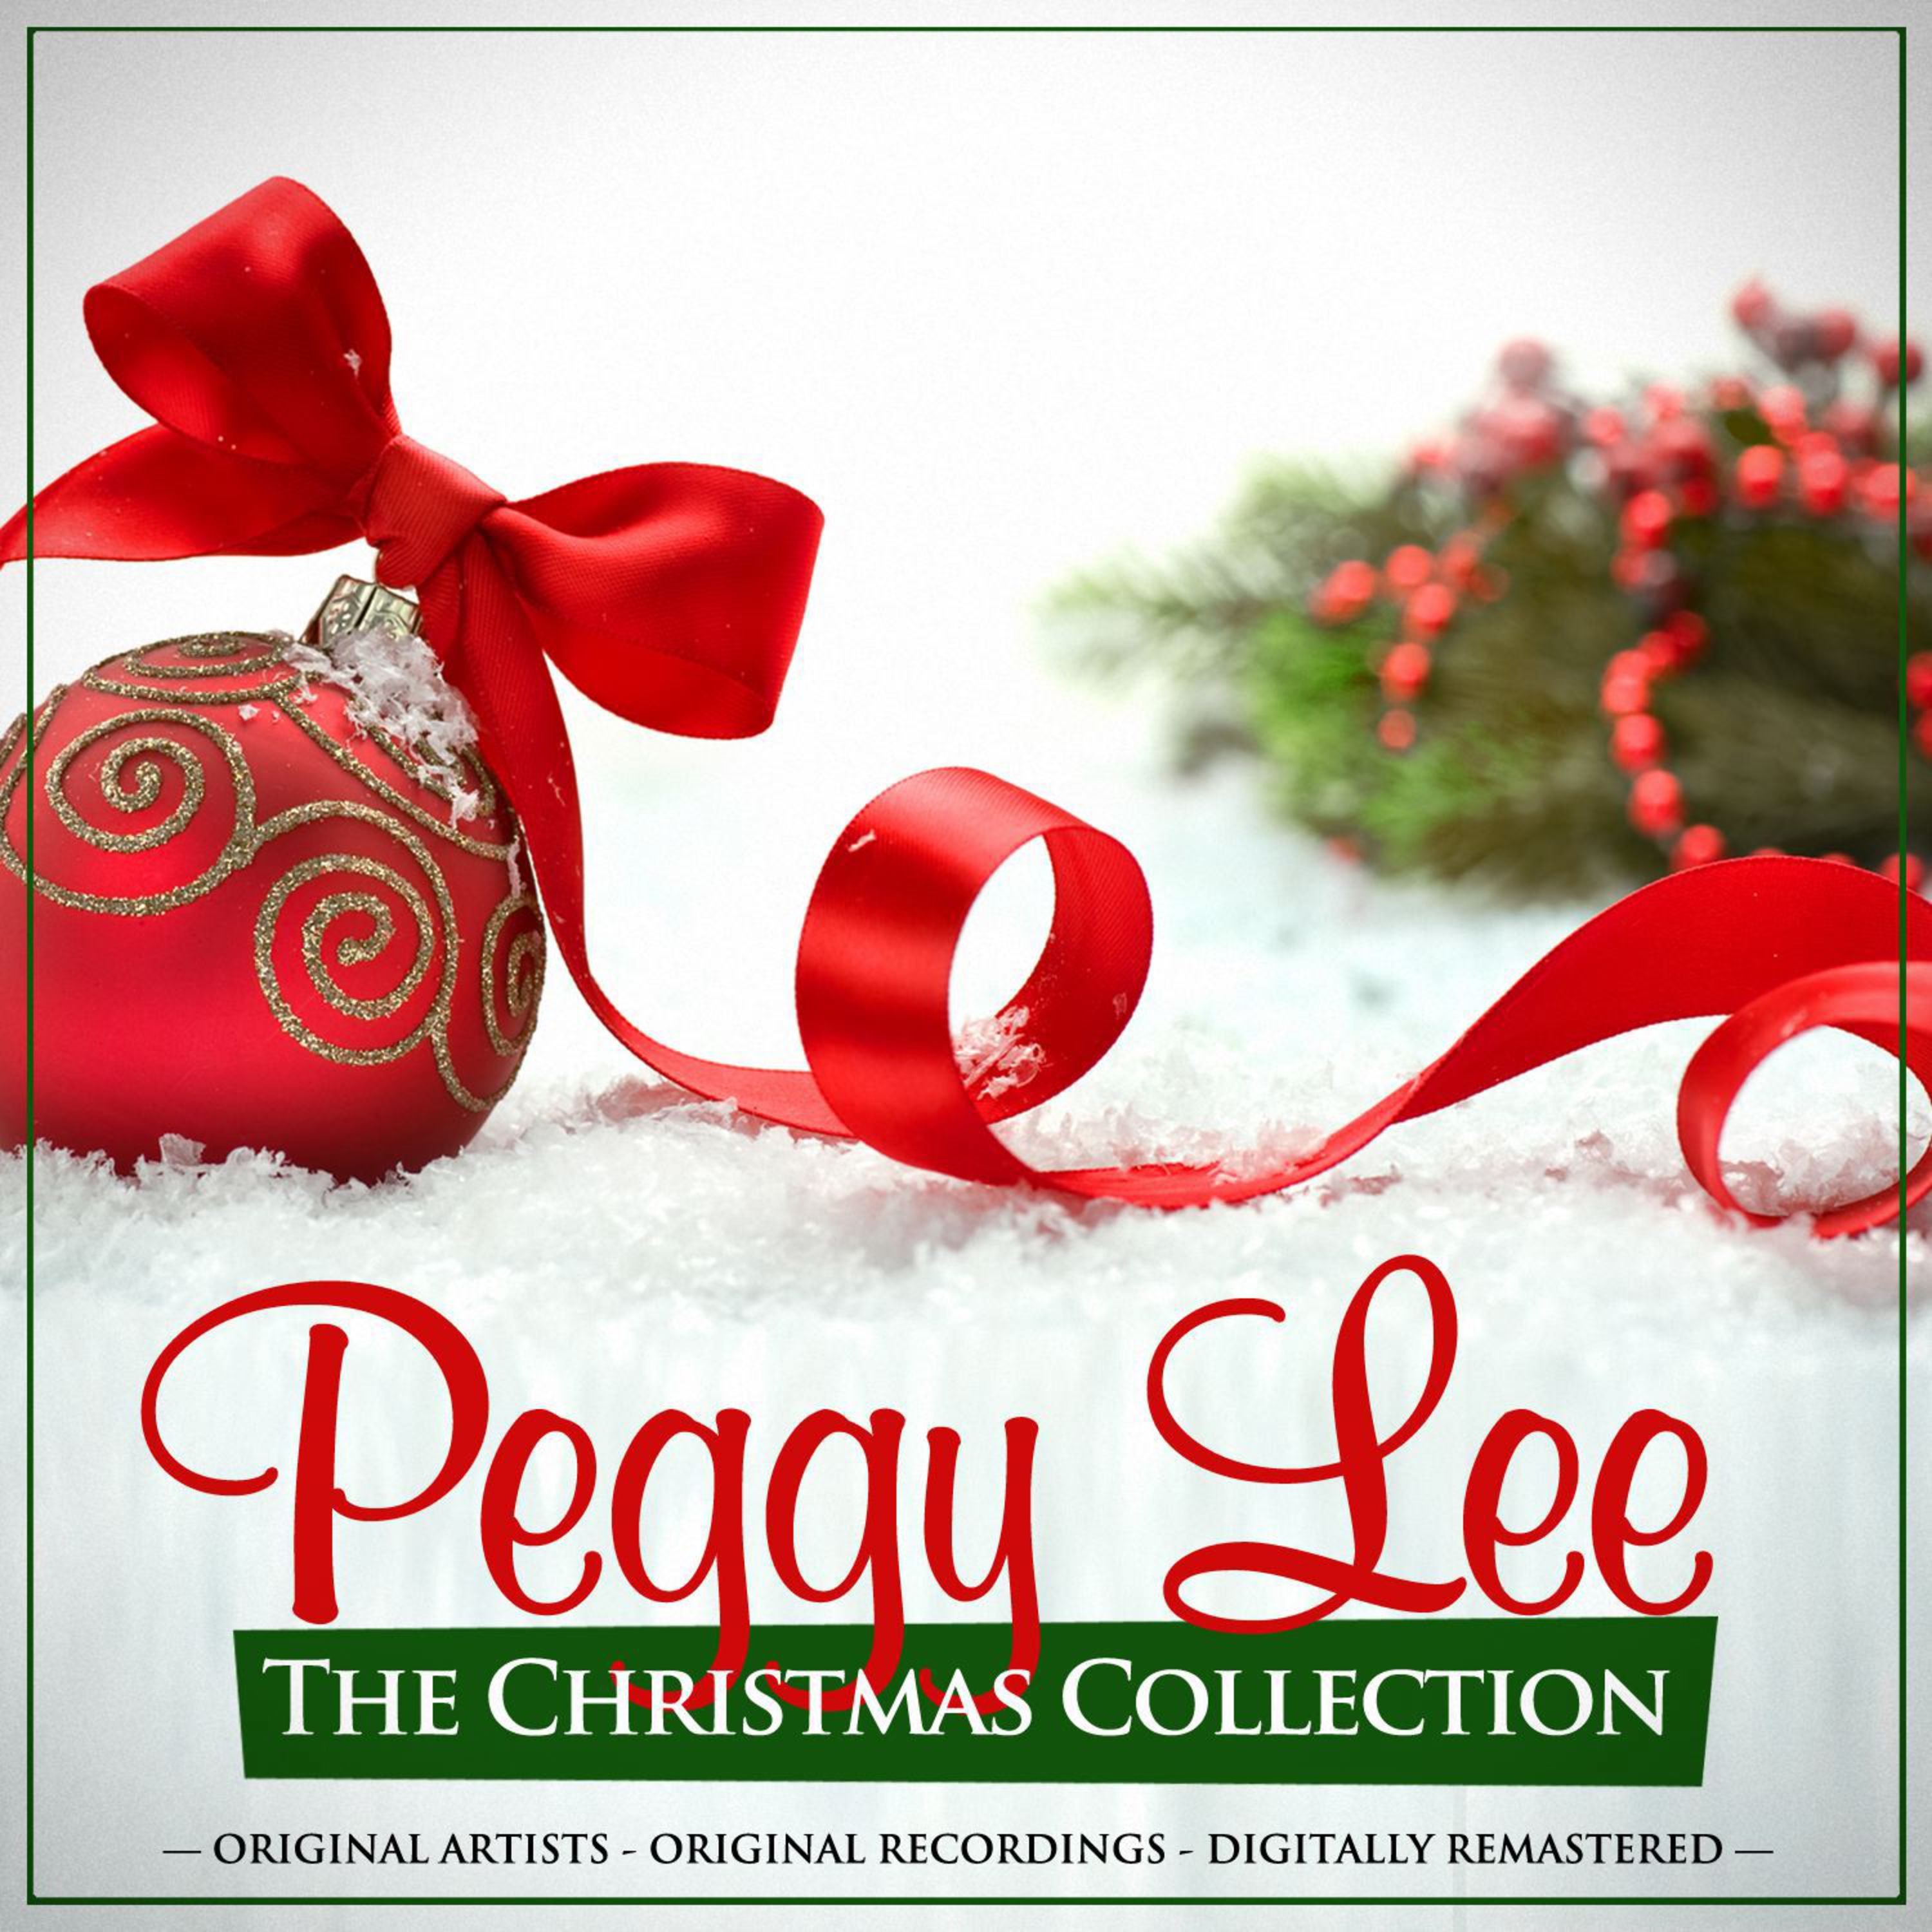 The Christmas Collection: Peggy Lee (Remastered)